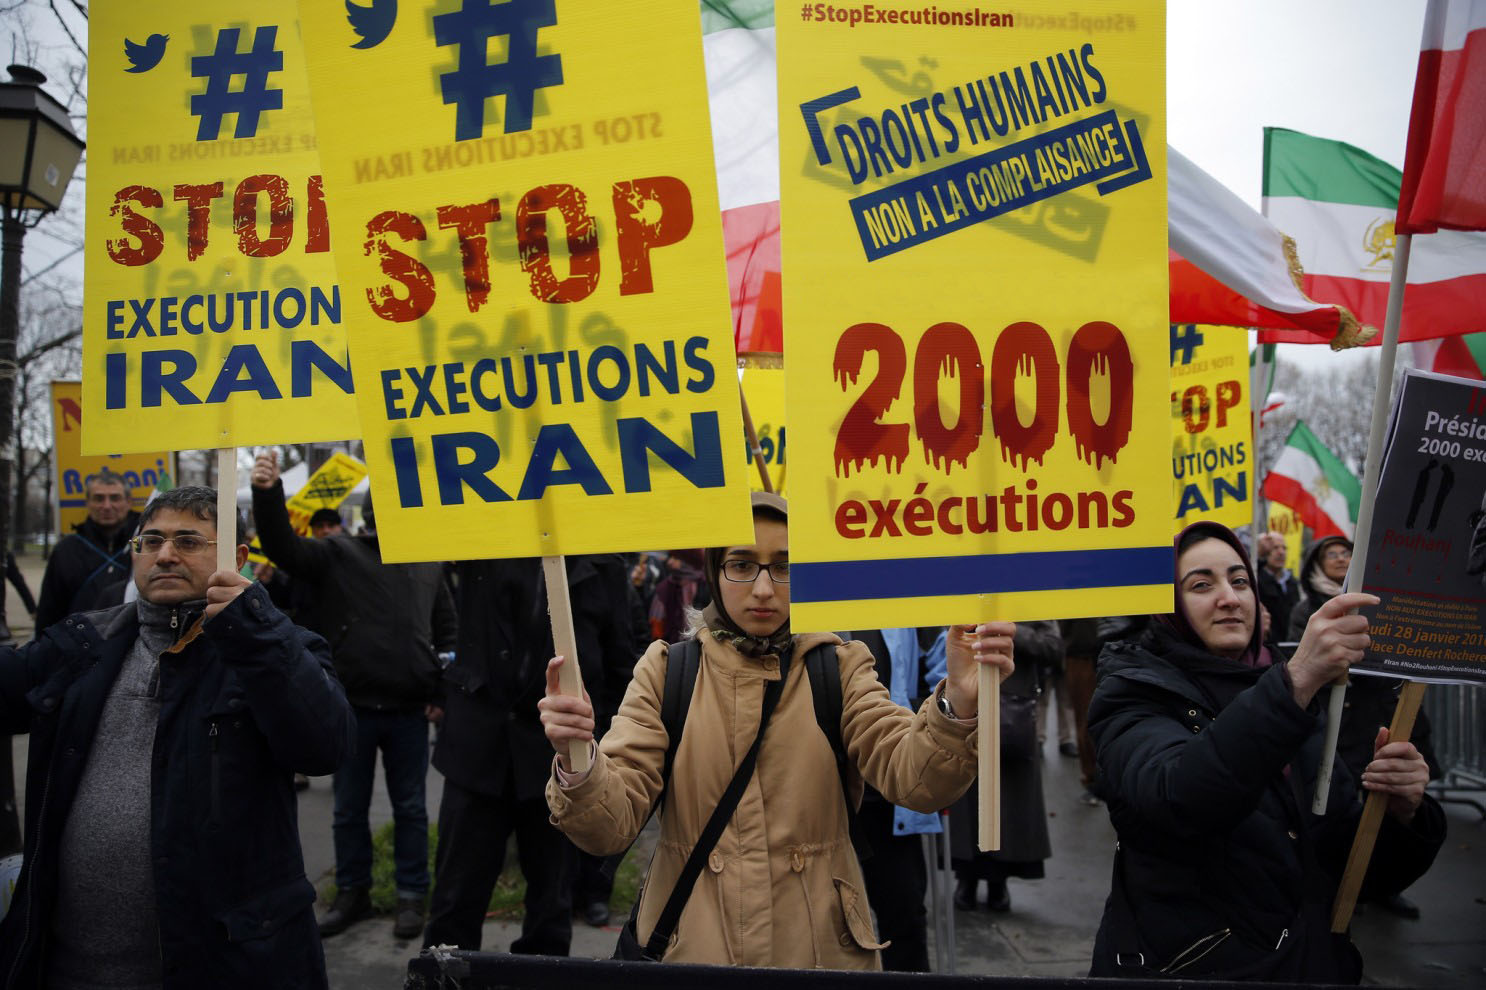 Stop execution in Iran